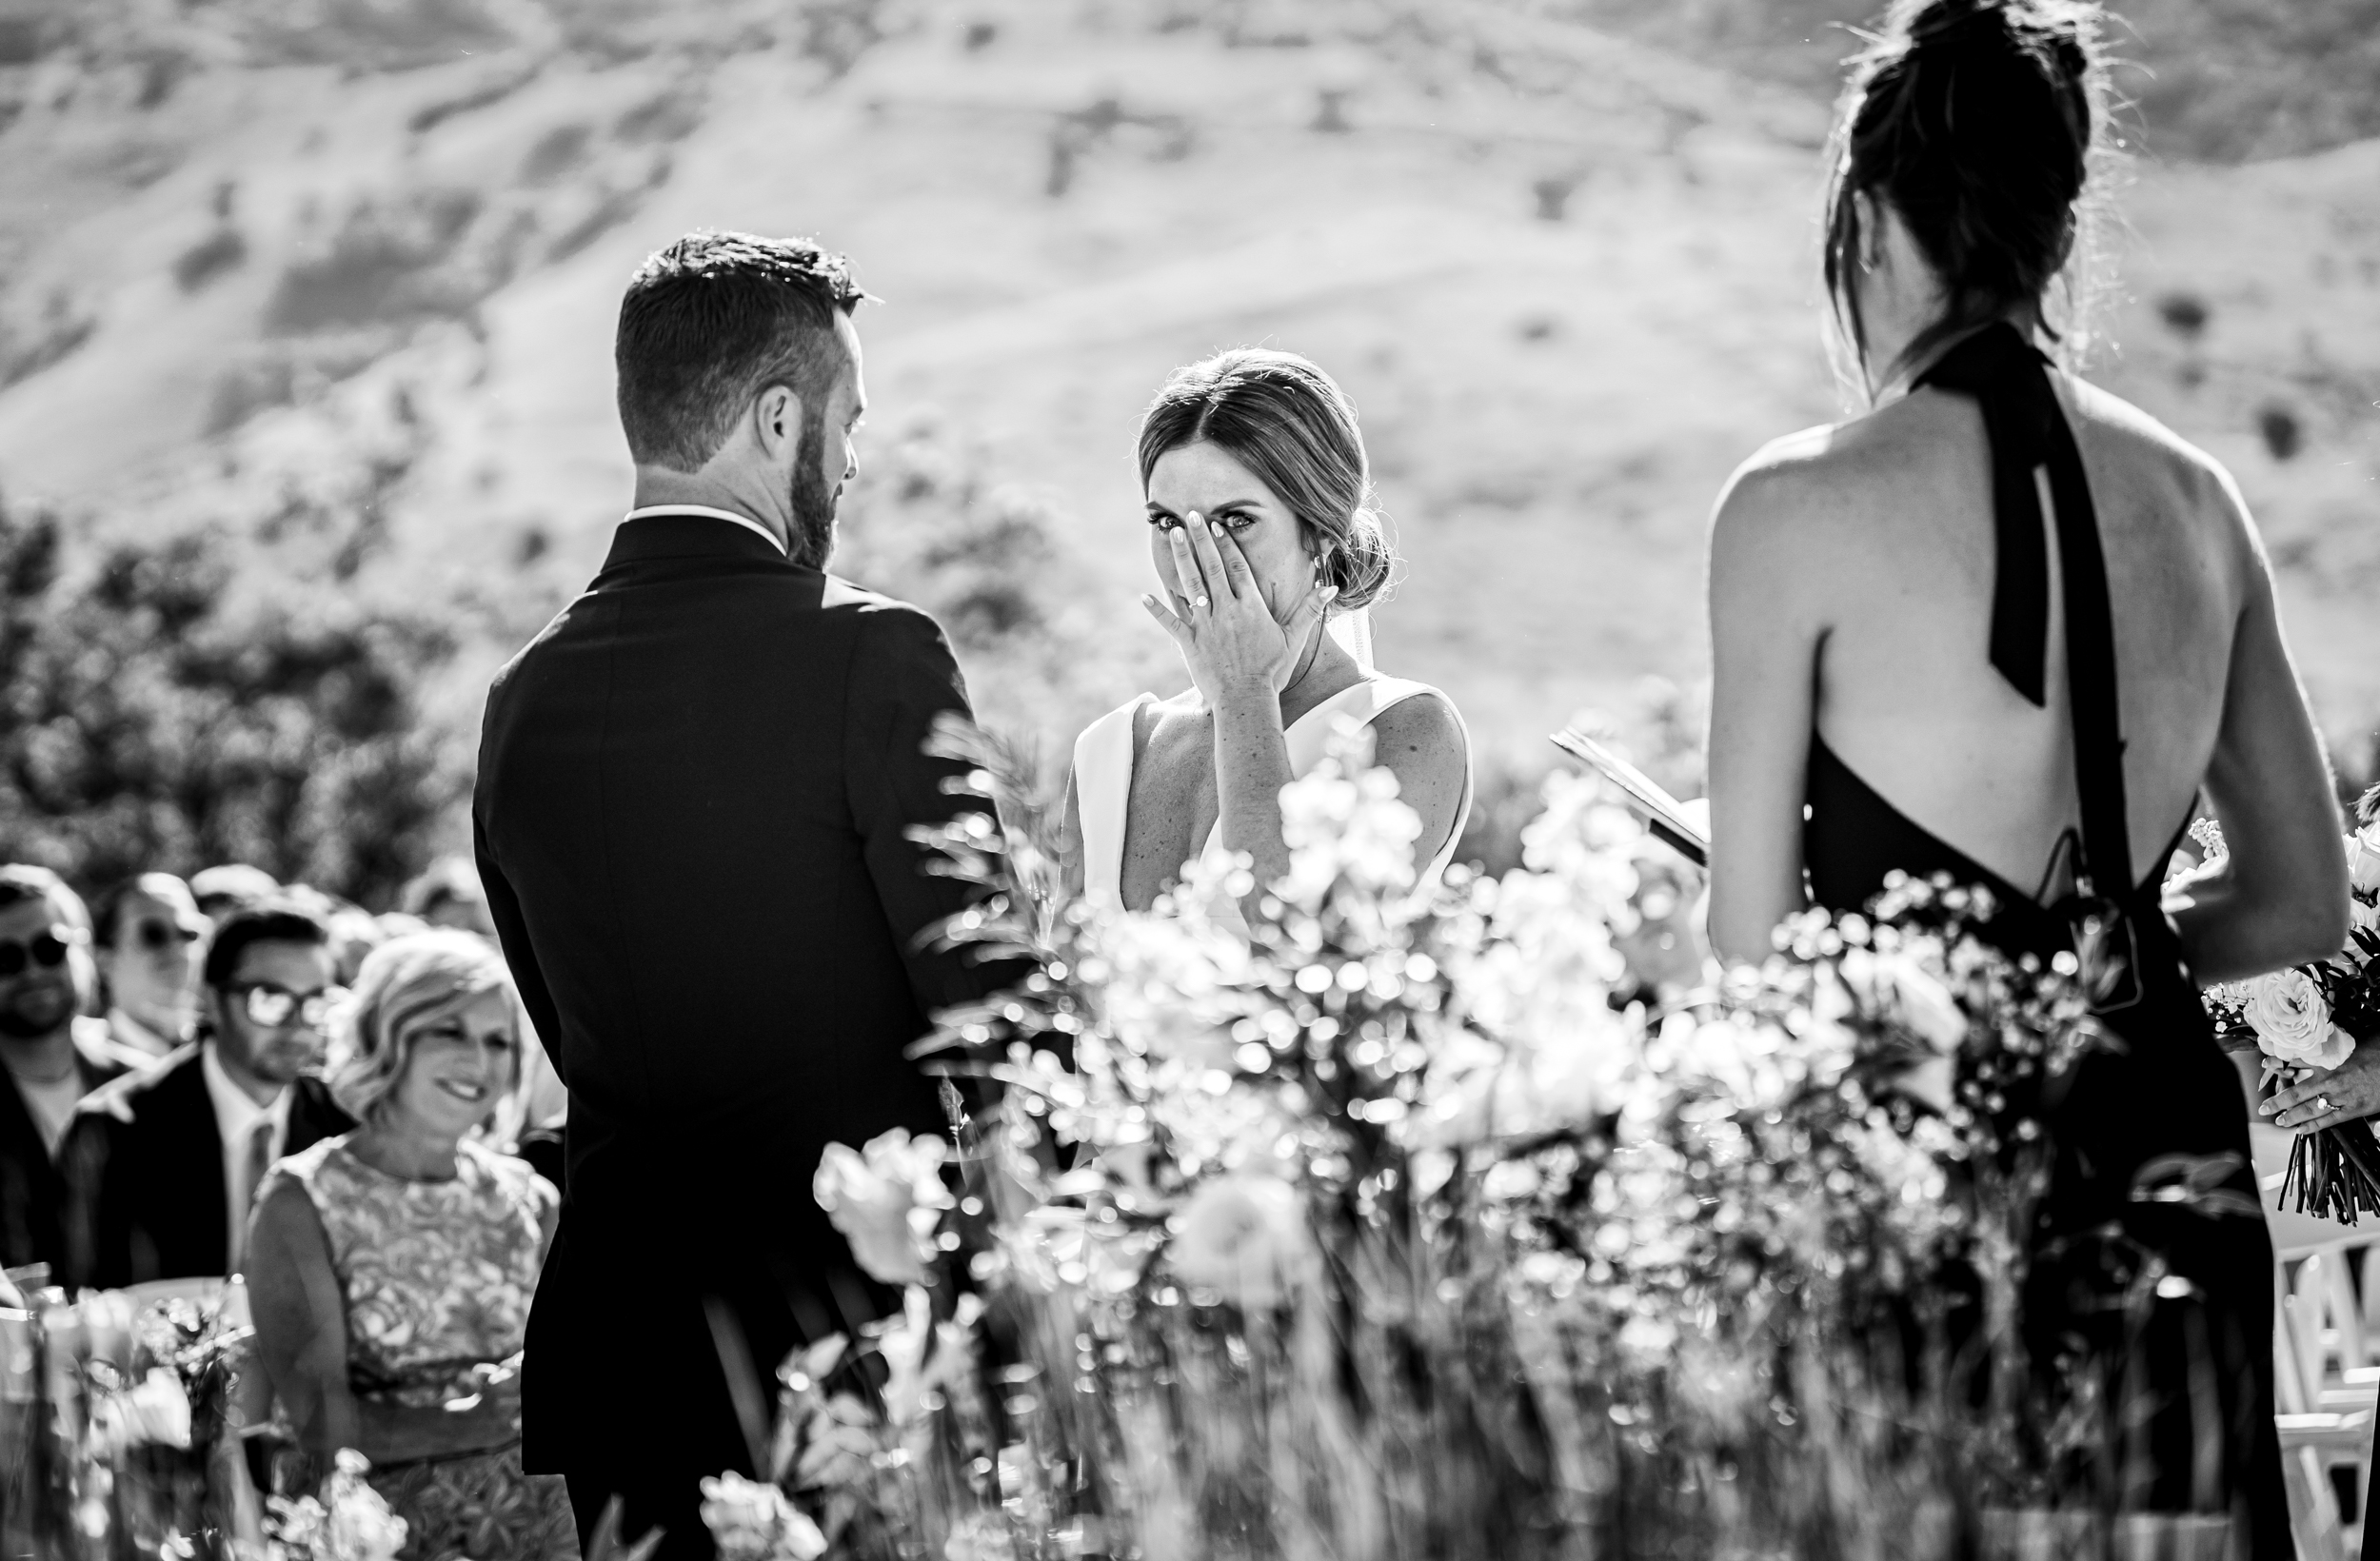 Ashley & Alex's wedding at The Manor House in June, in Littleton, Colorado. Manor House Wedding, Littleton, Denver, Colorado, Denver Wedding Photographer, Denver Wedding Photos, Denver Wedding, Wedding Ceremony